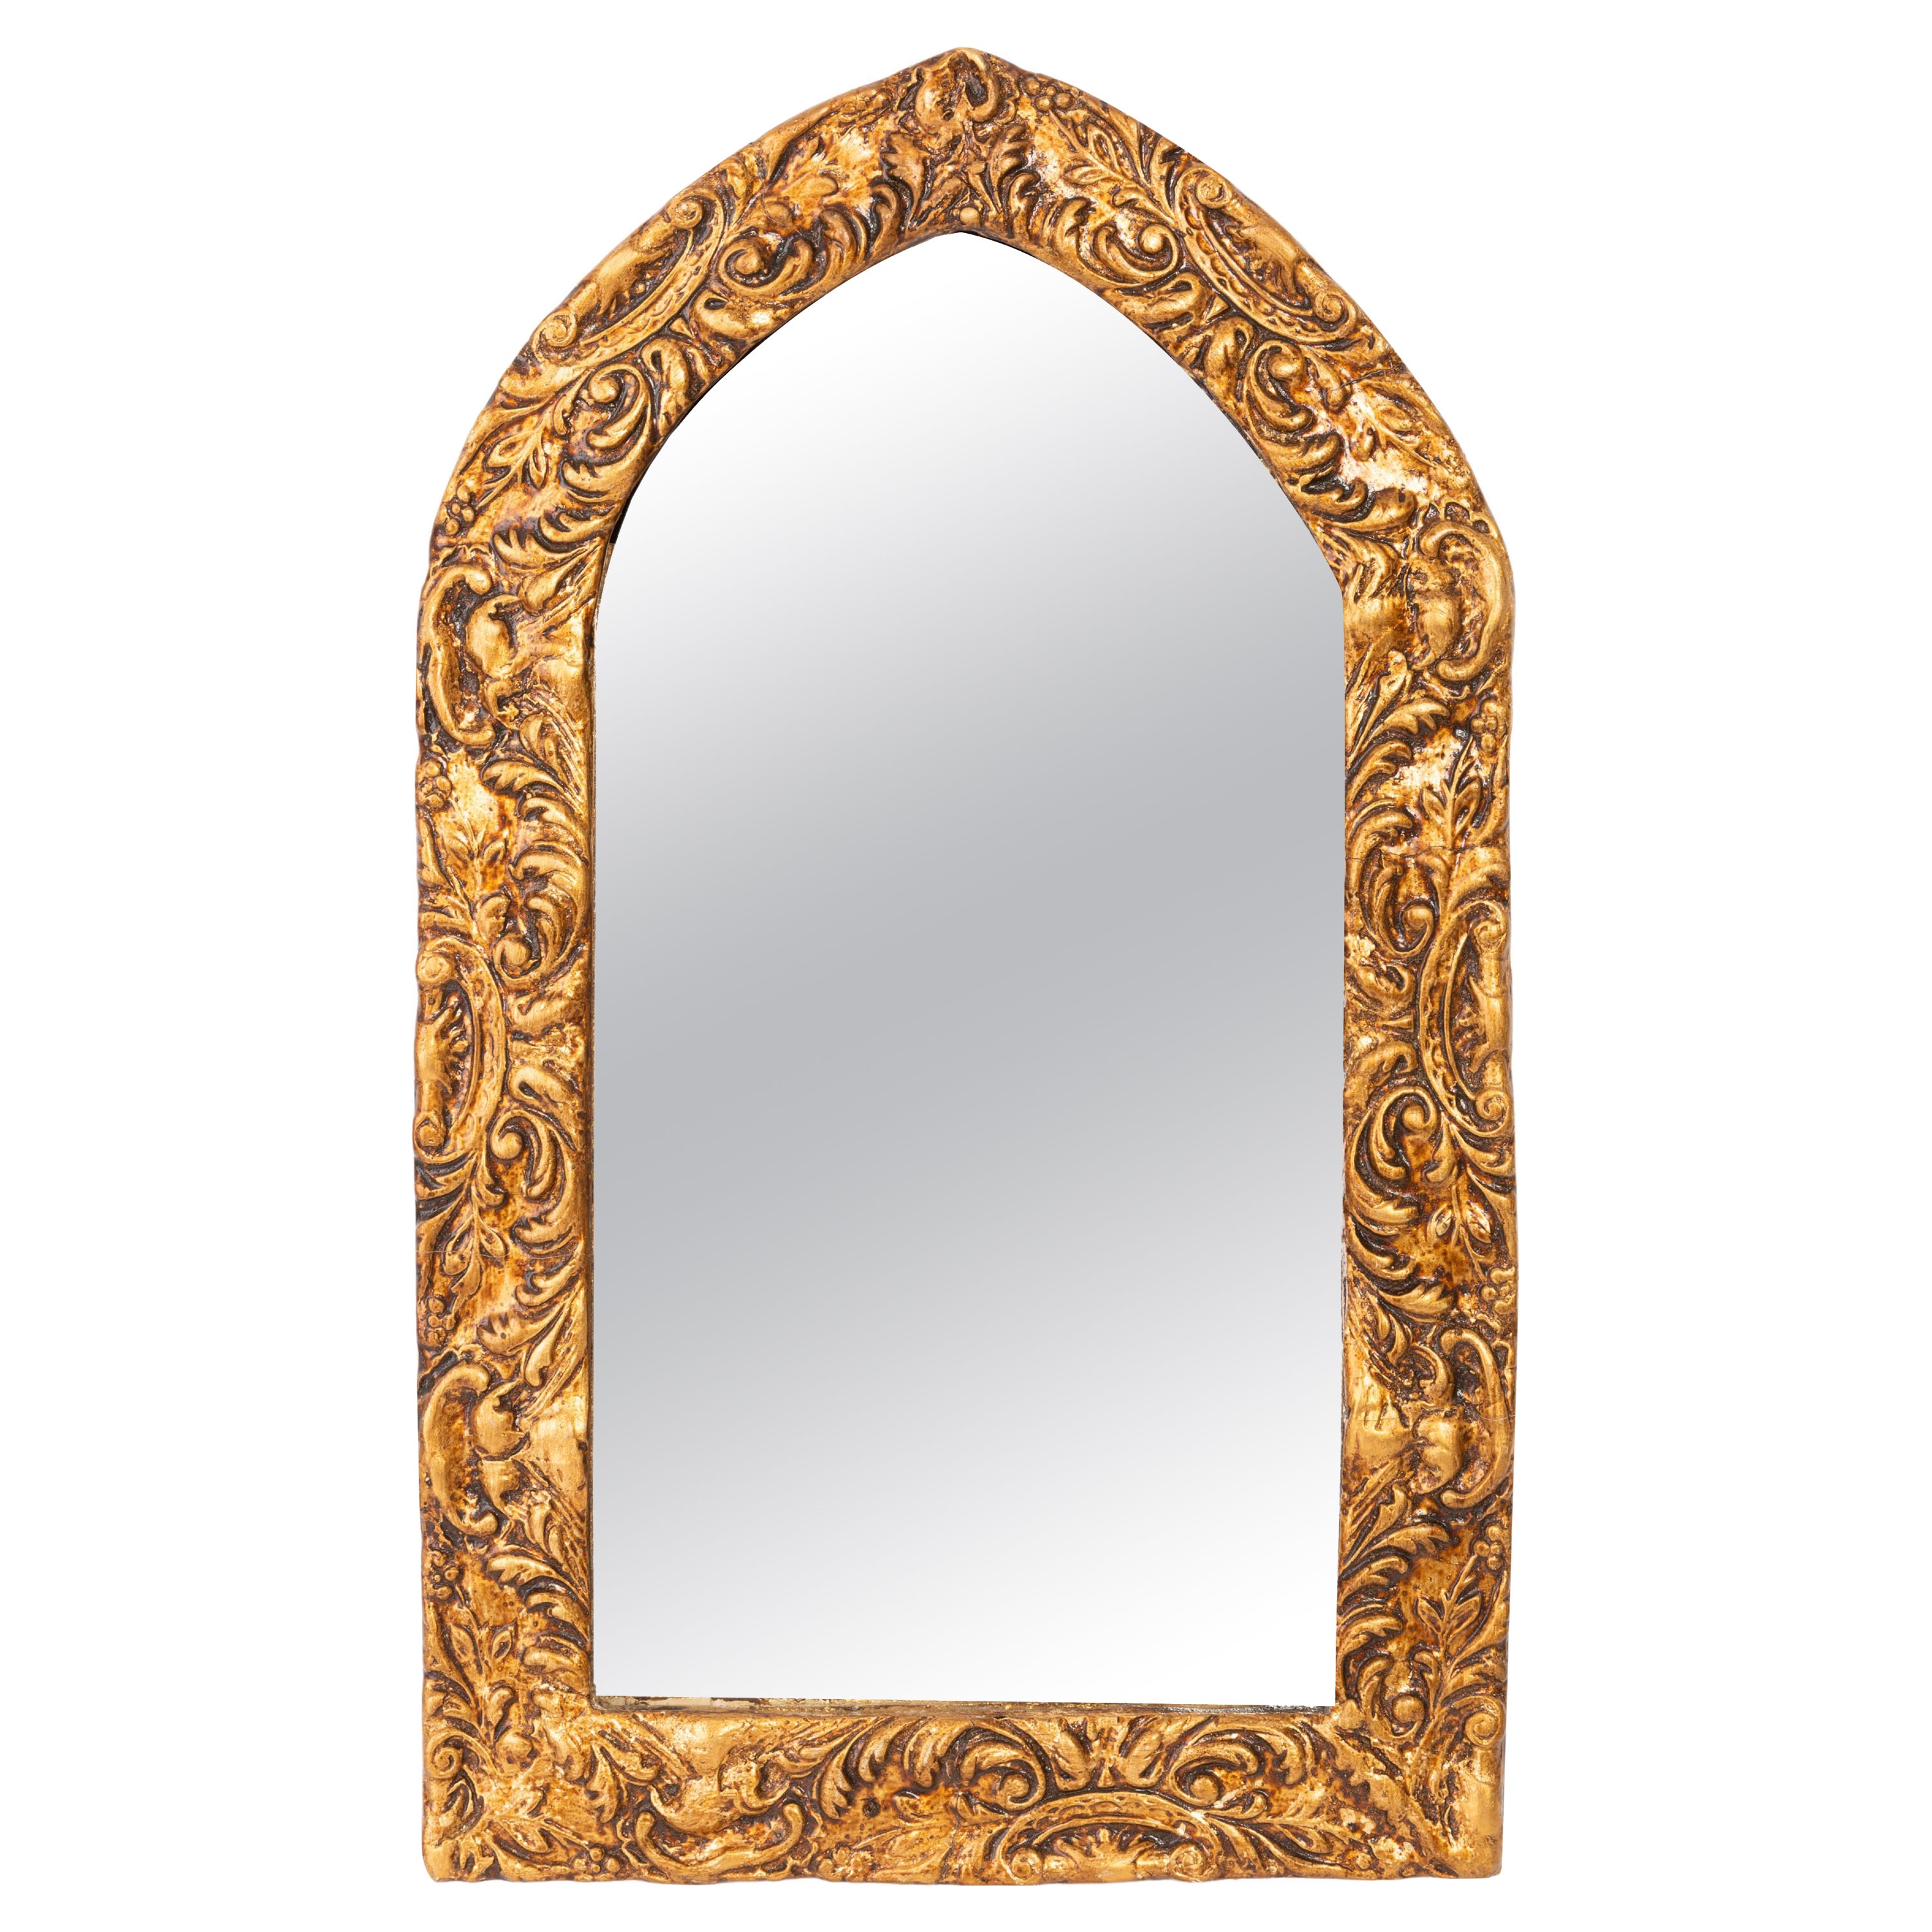 Midcentury Vintage Old Gold Wood Medium Mirror with Flowers, Italy, 1960s